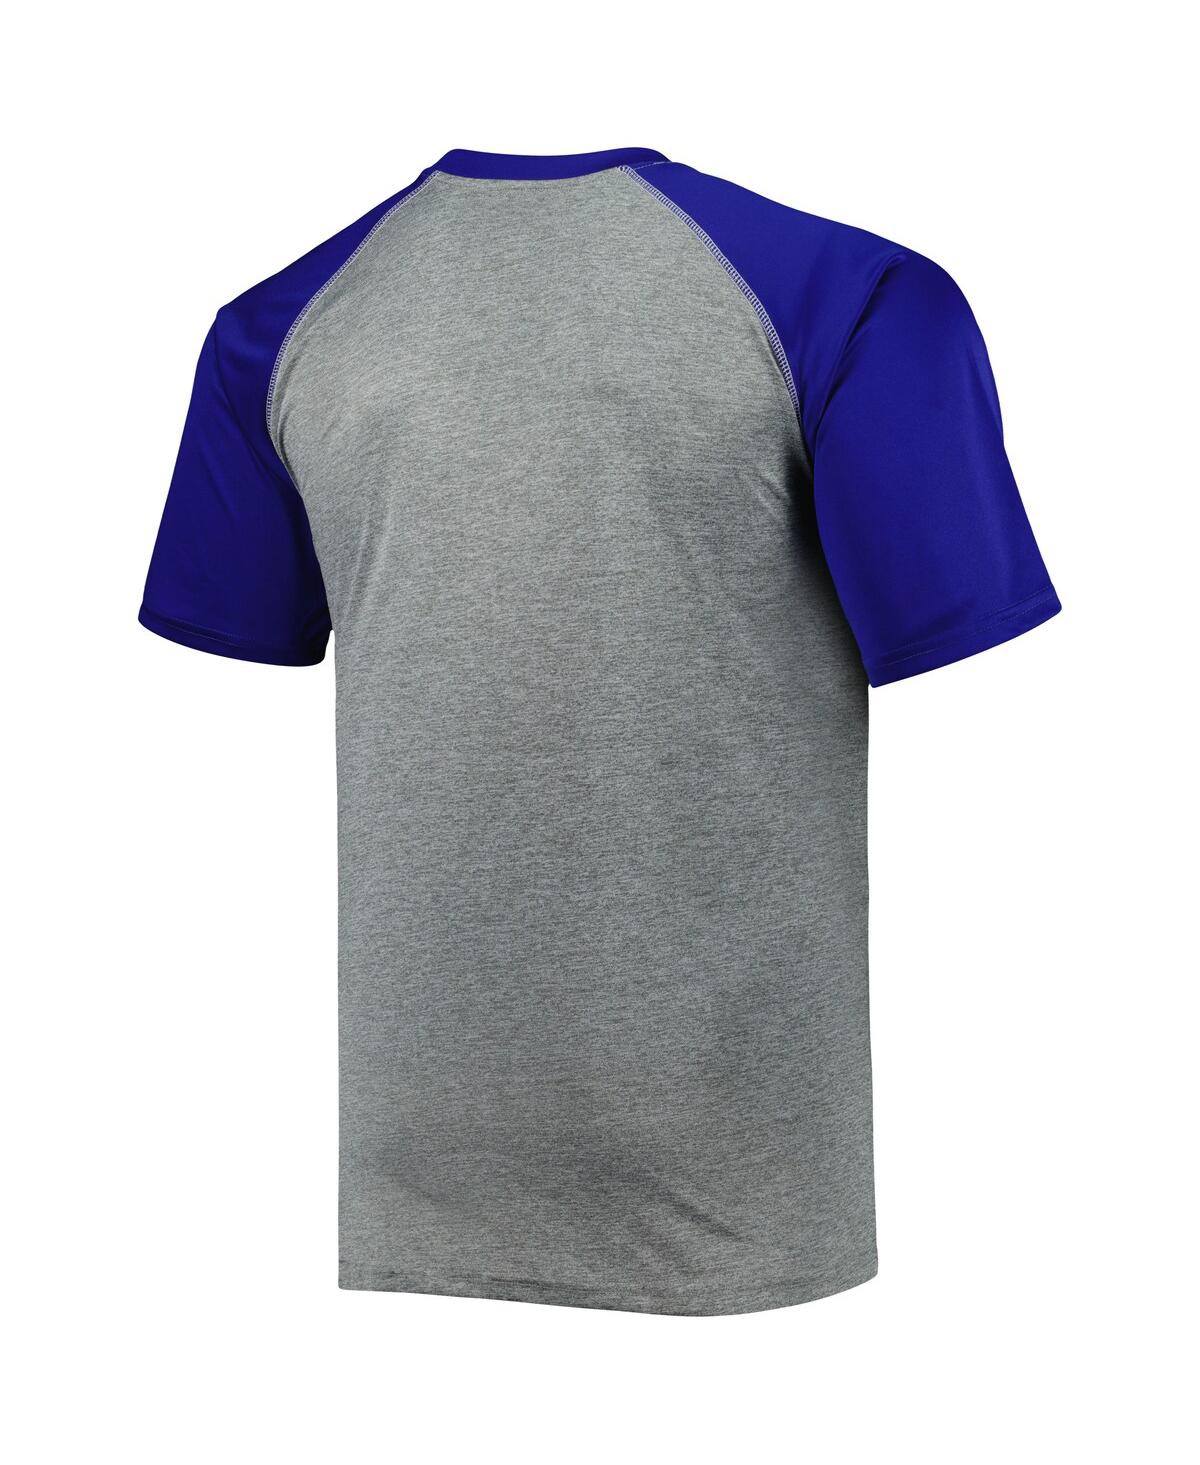 Nike Men's Gray Tampa Bay Rays Authentic Collection Game Raglan